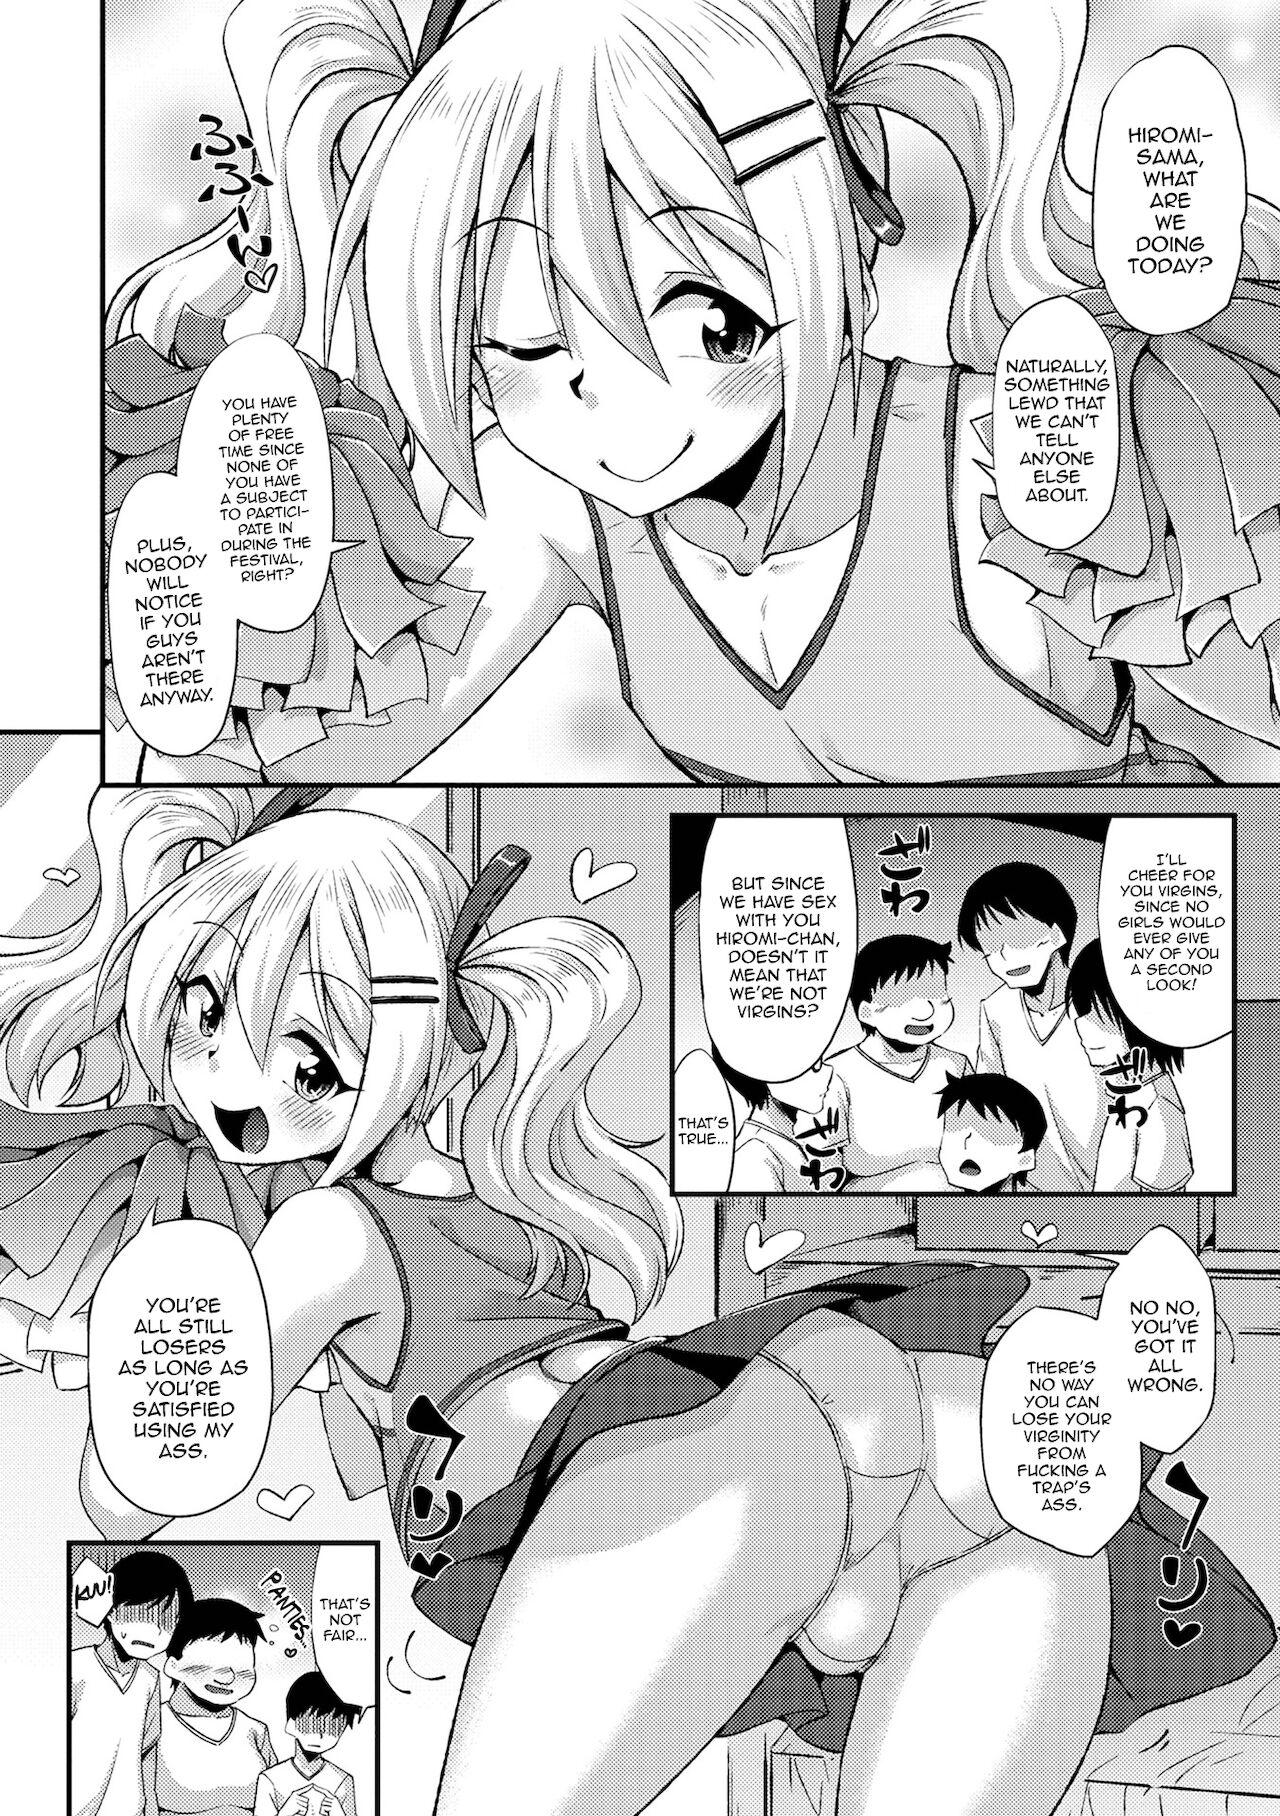 Best Blowjobs Ever Doutei Cheerleading! Tight - Page 2